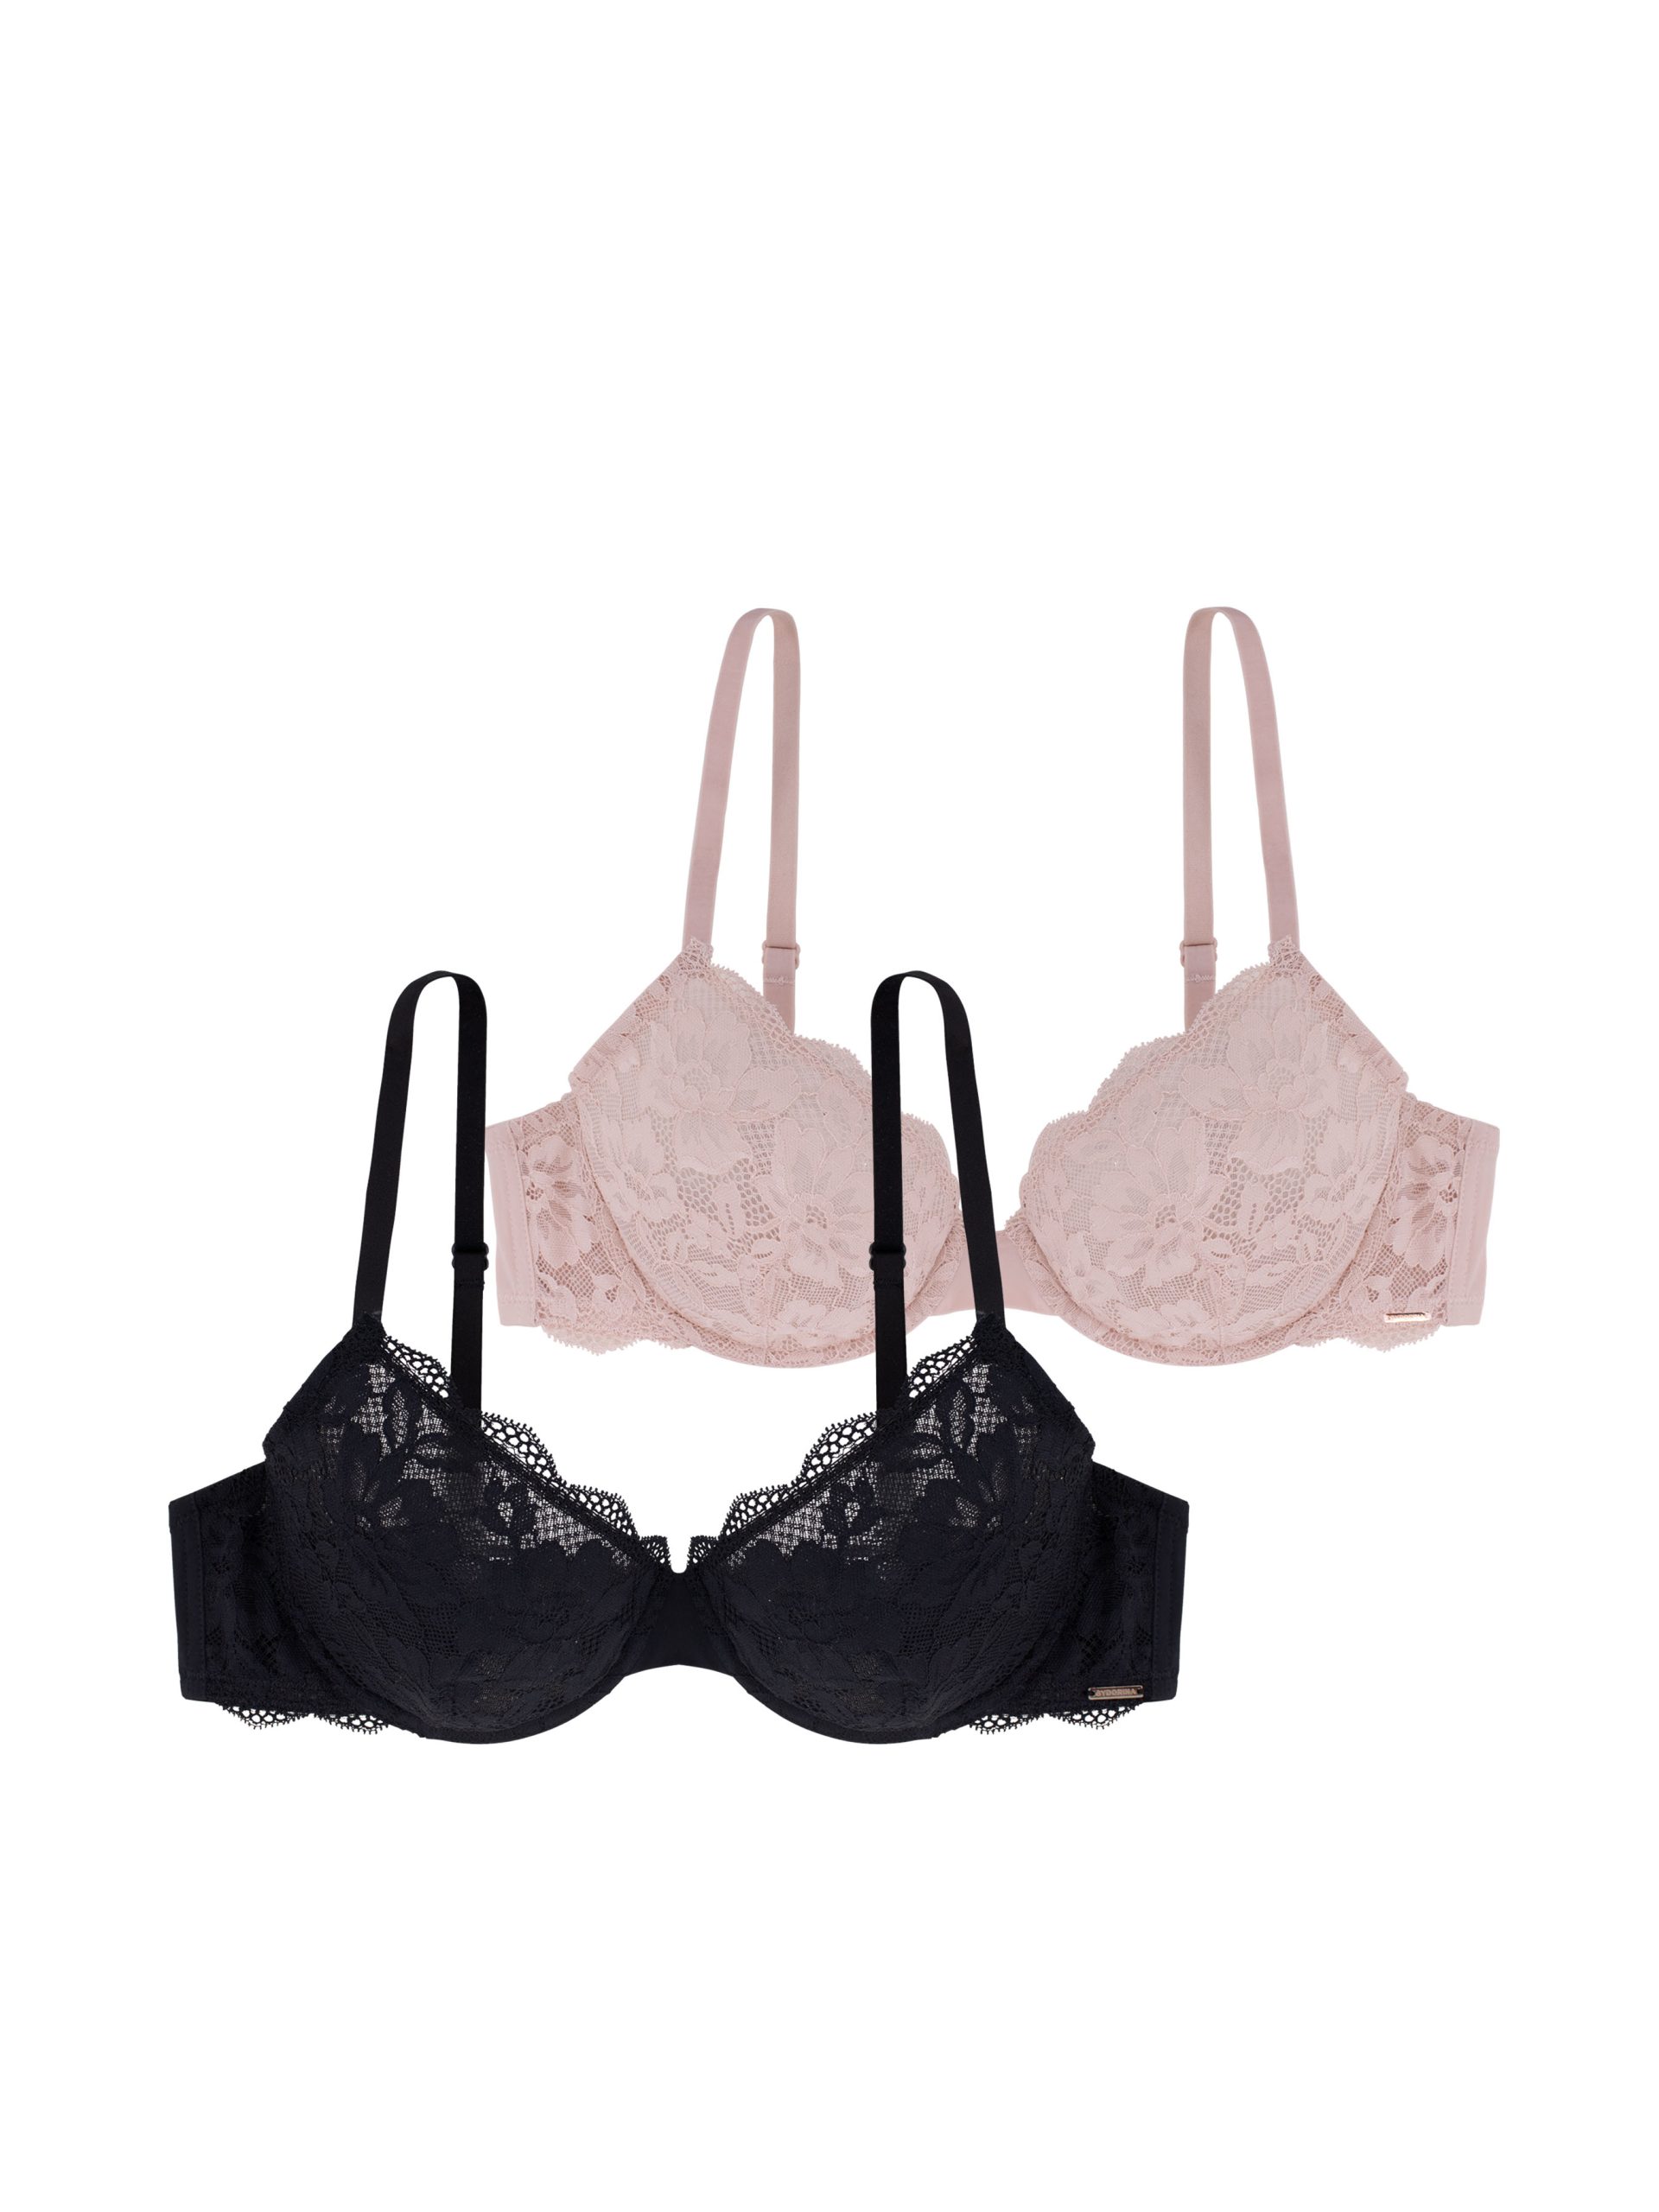 Norns Women Lace Lingerie Set Unlined Push Up Bra Set Fashion Active  Lingerie And Panty Bra Bralette Set Underwear Y200708 From Luo02, $9.71